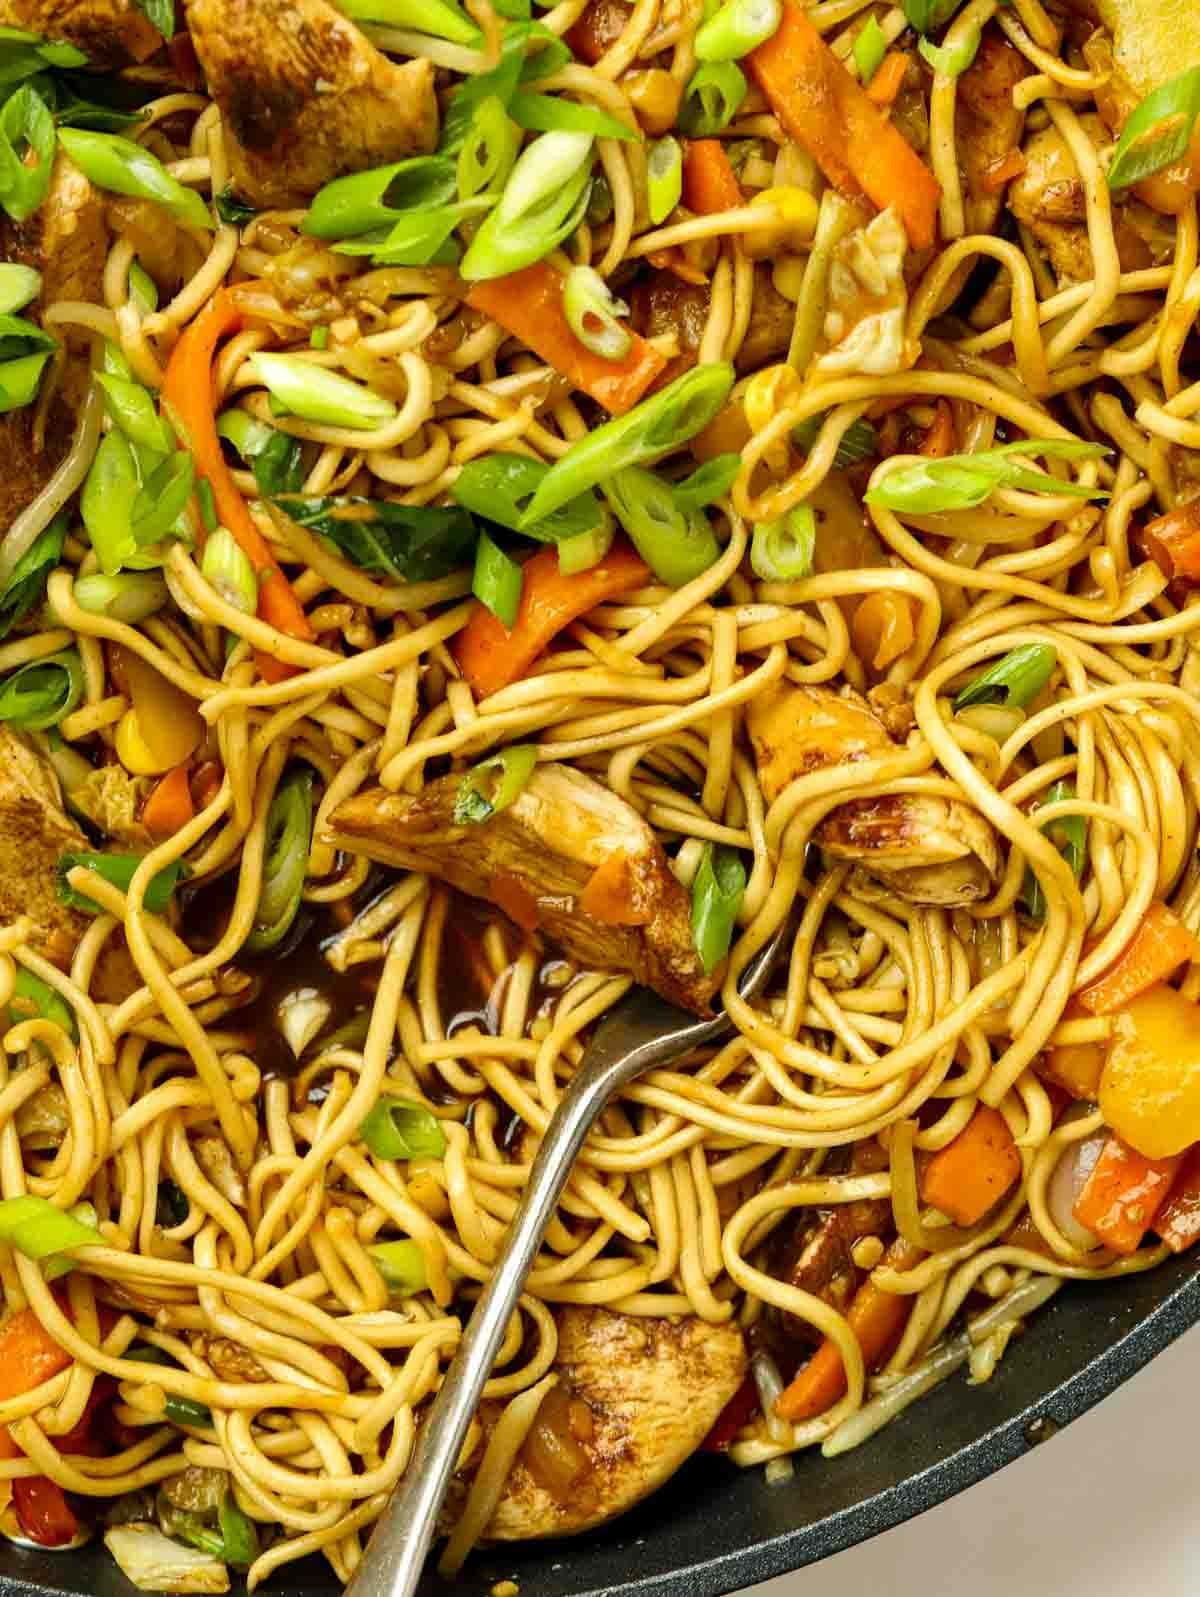 A close up of cooked noodles, chicken and vegetables in a dark, sticky Chinese-style sauce for a simple Chicken Chow Mein recipe.